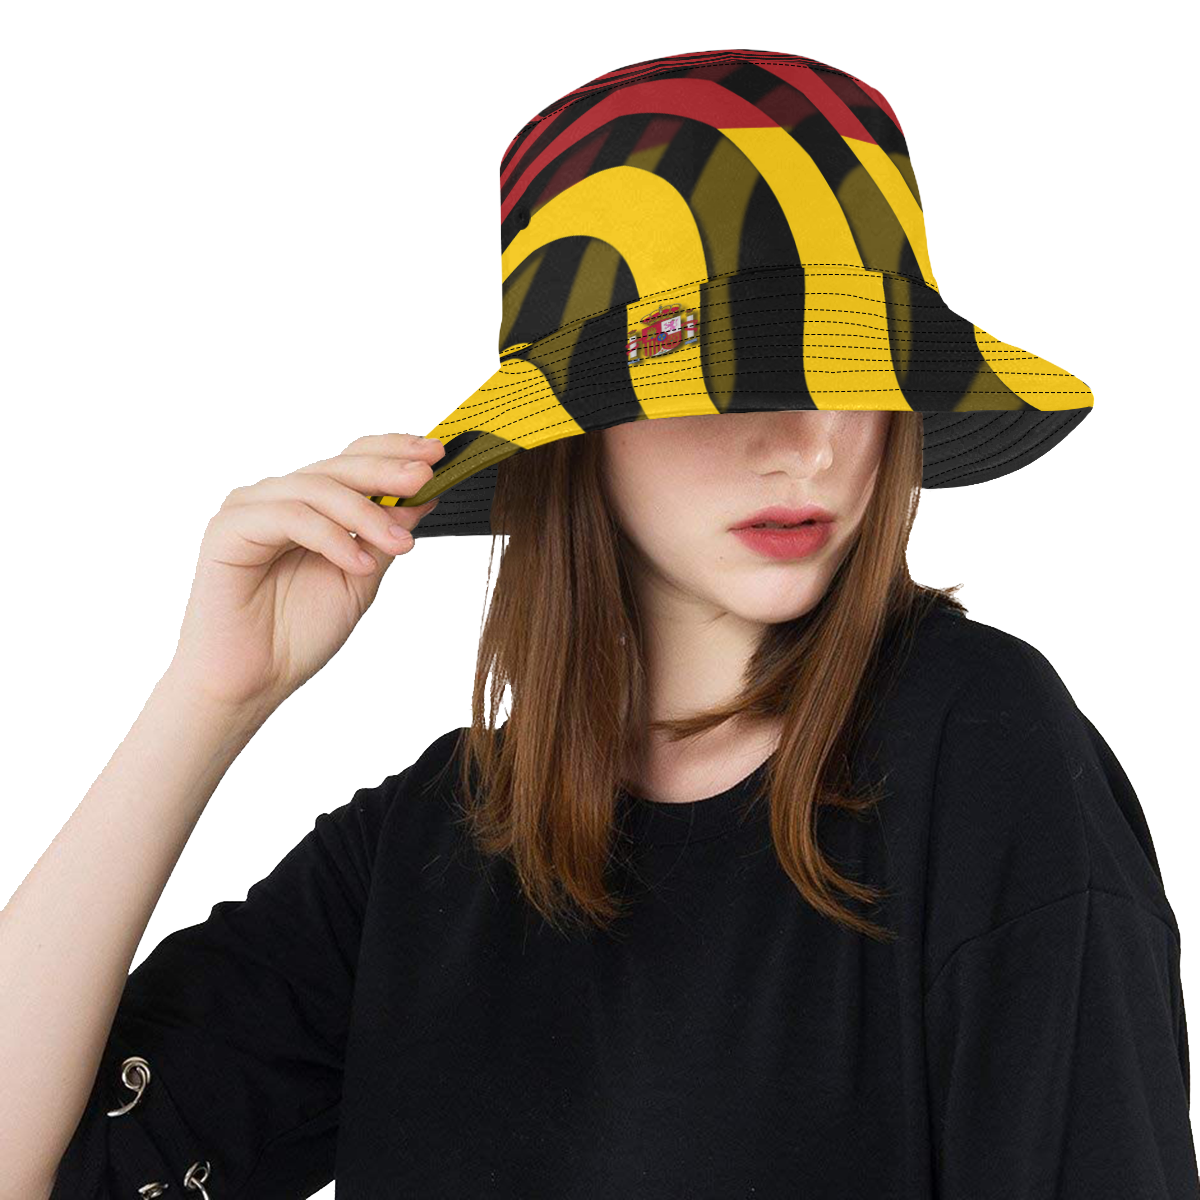 The Flag of Spain All Over Print Bucket Hat